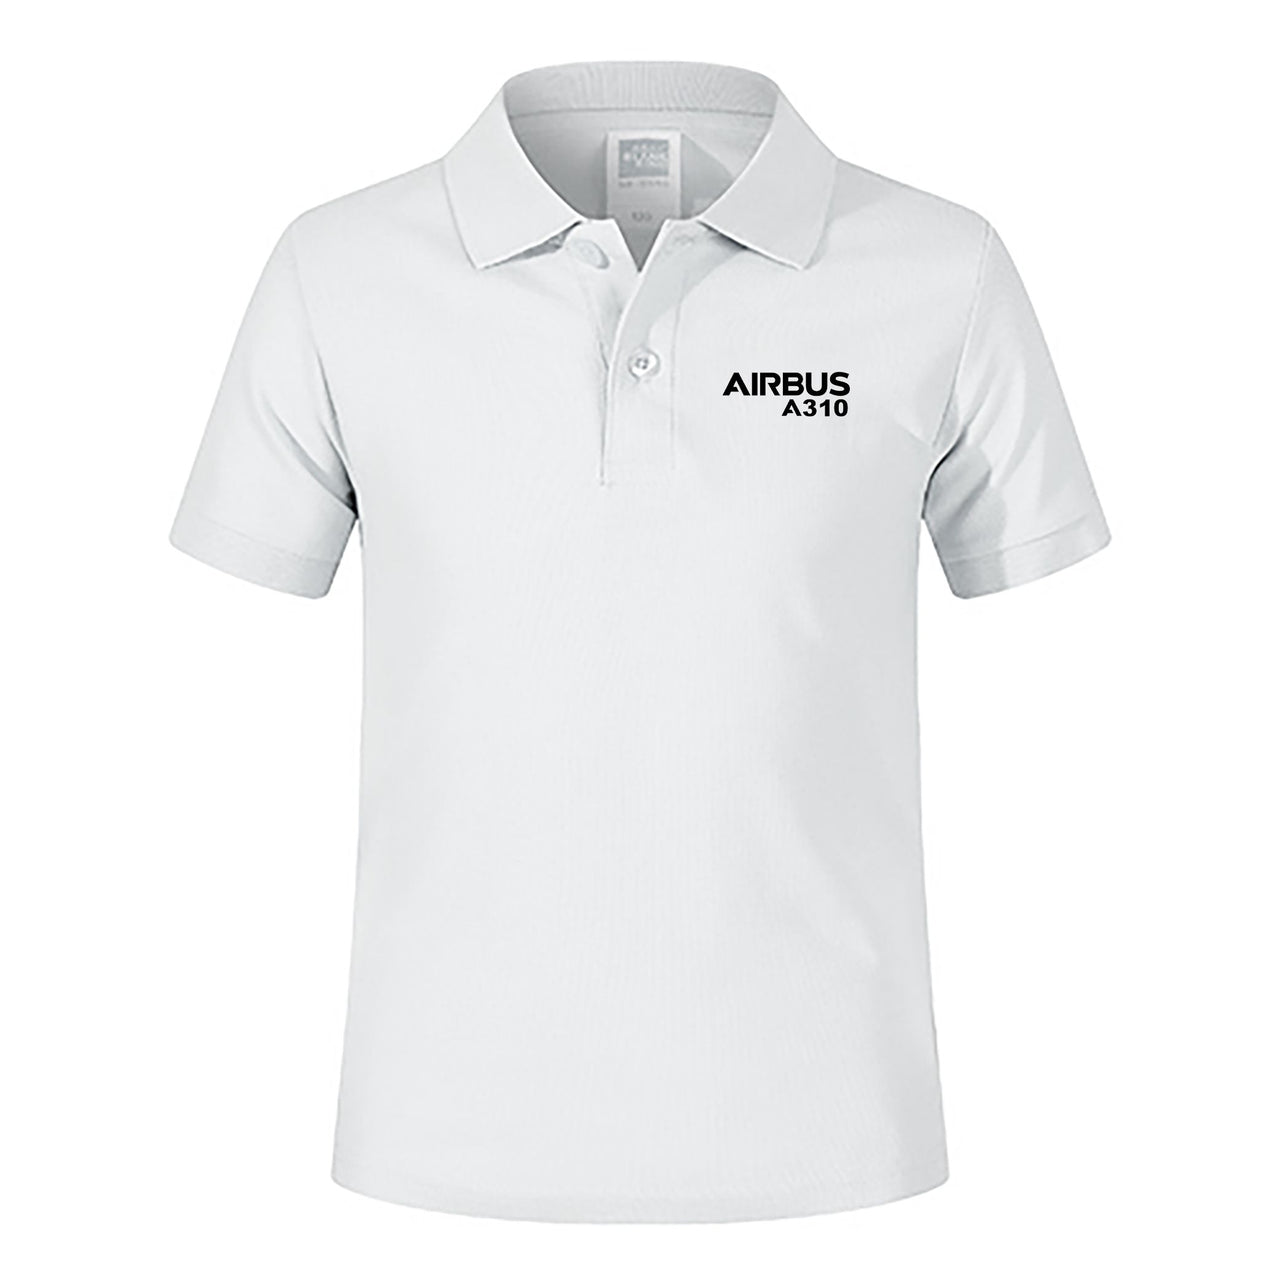 Airbus A310 & Text Designed Children Polo T-Shirts